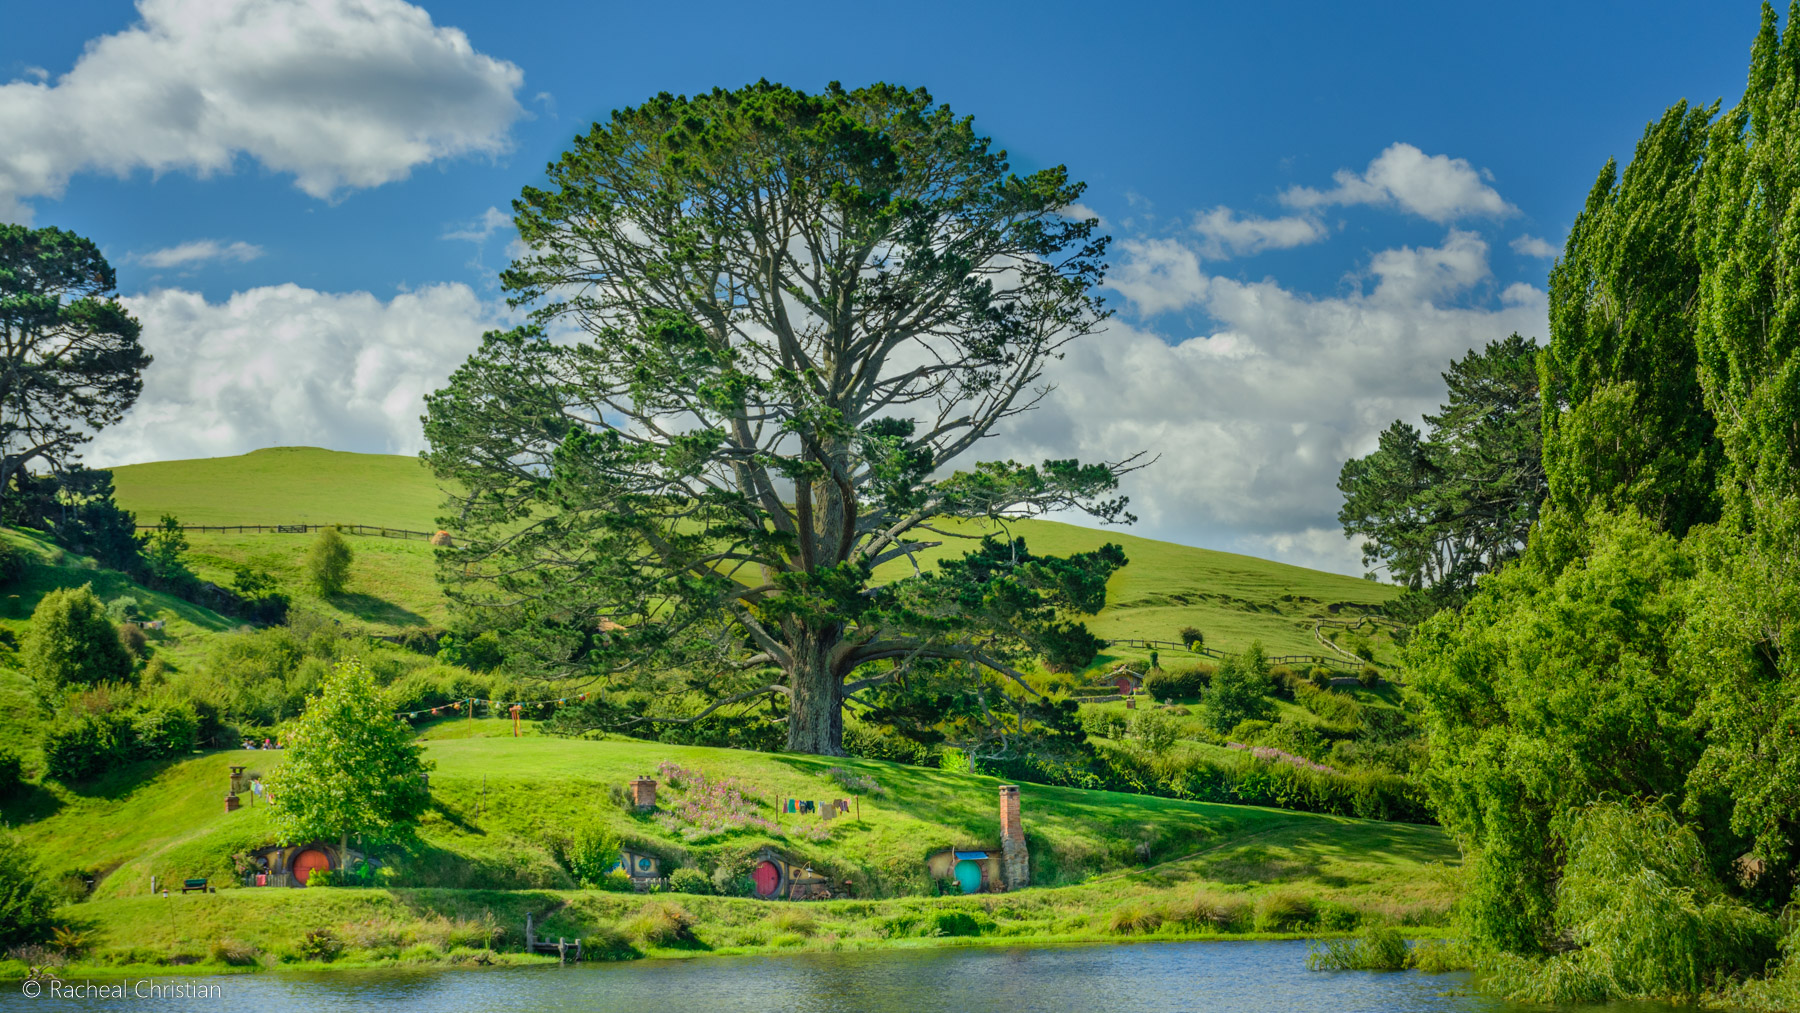 The Party Tree - Hobbiton by Racheal Christian -